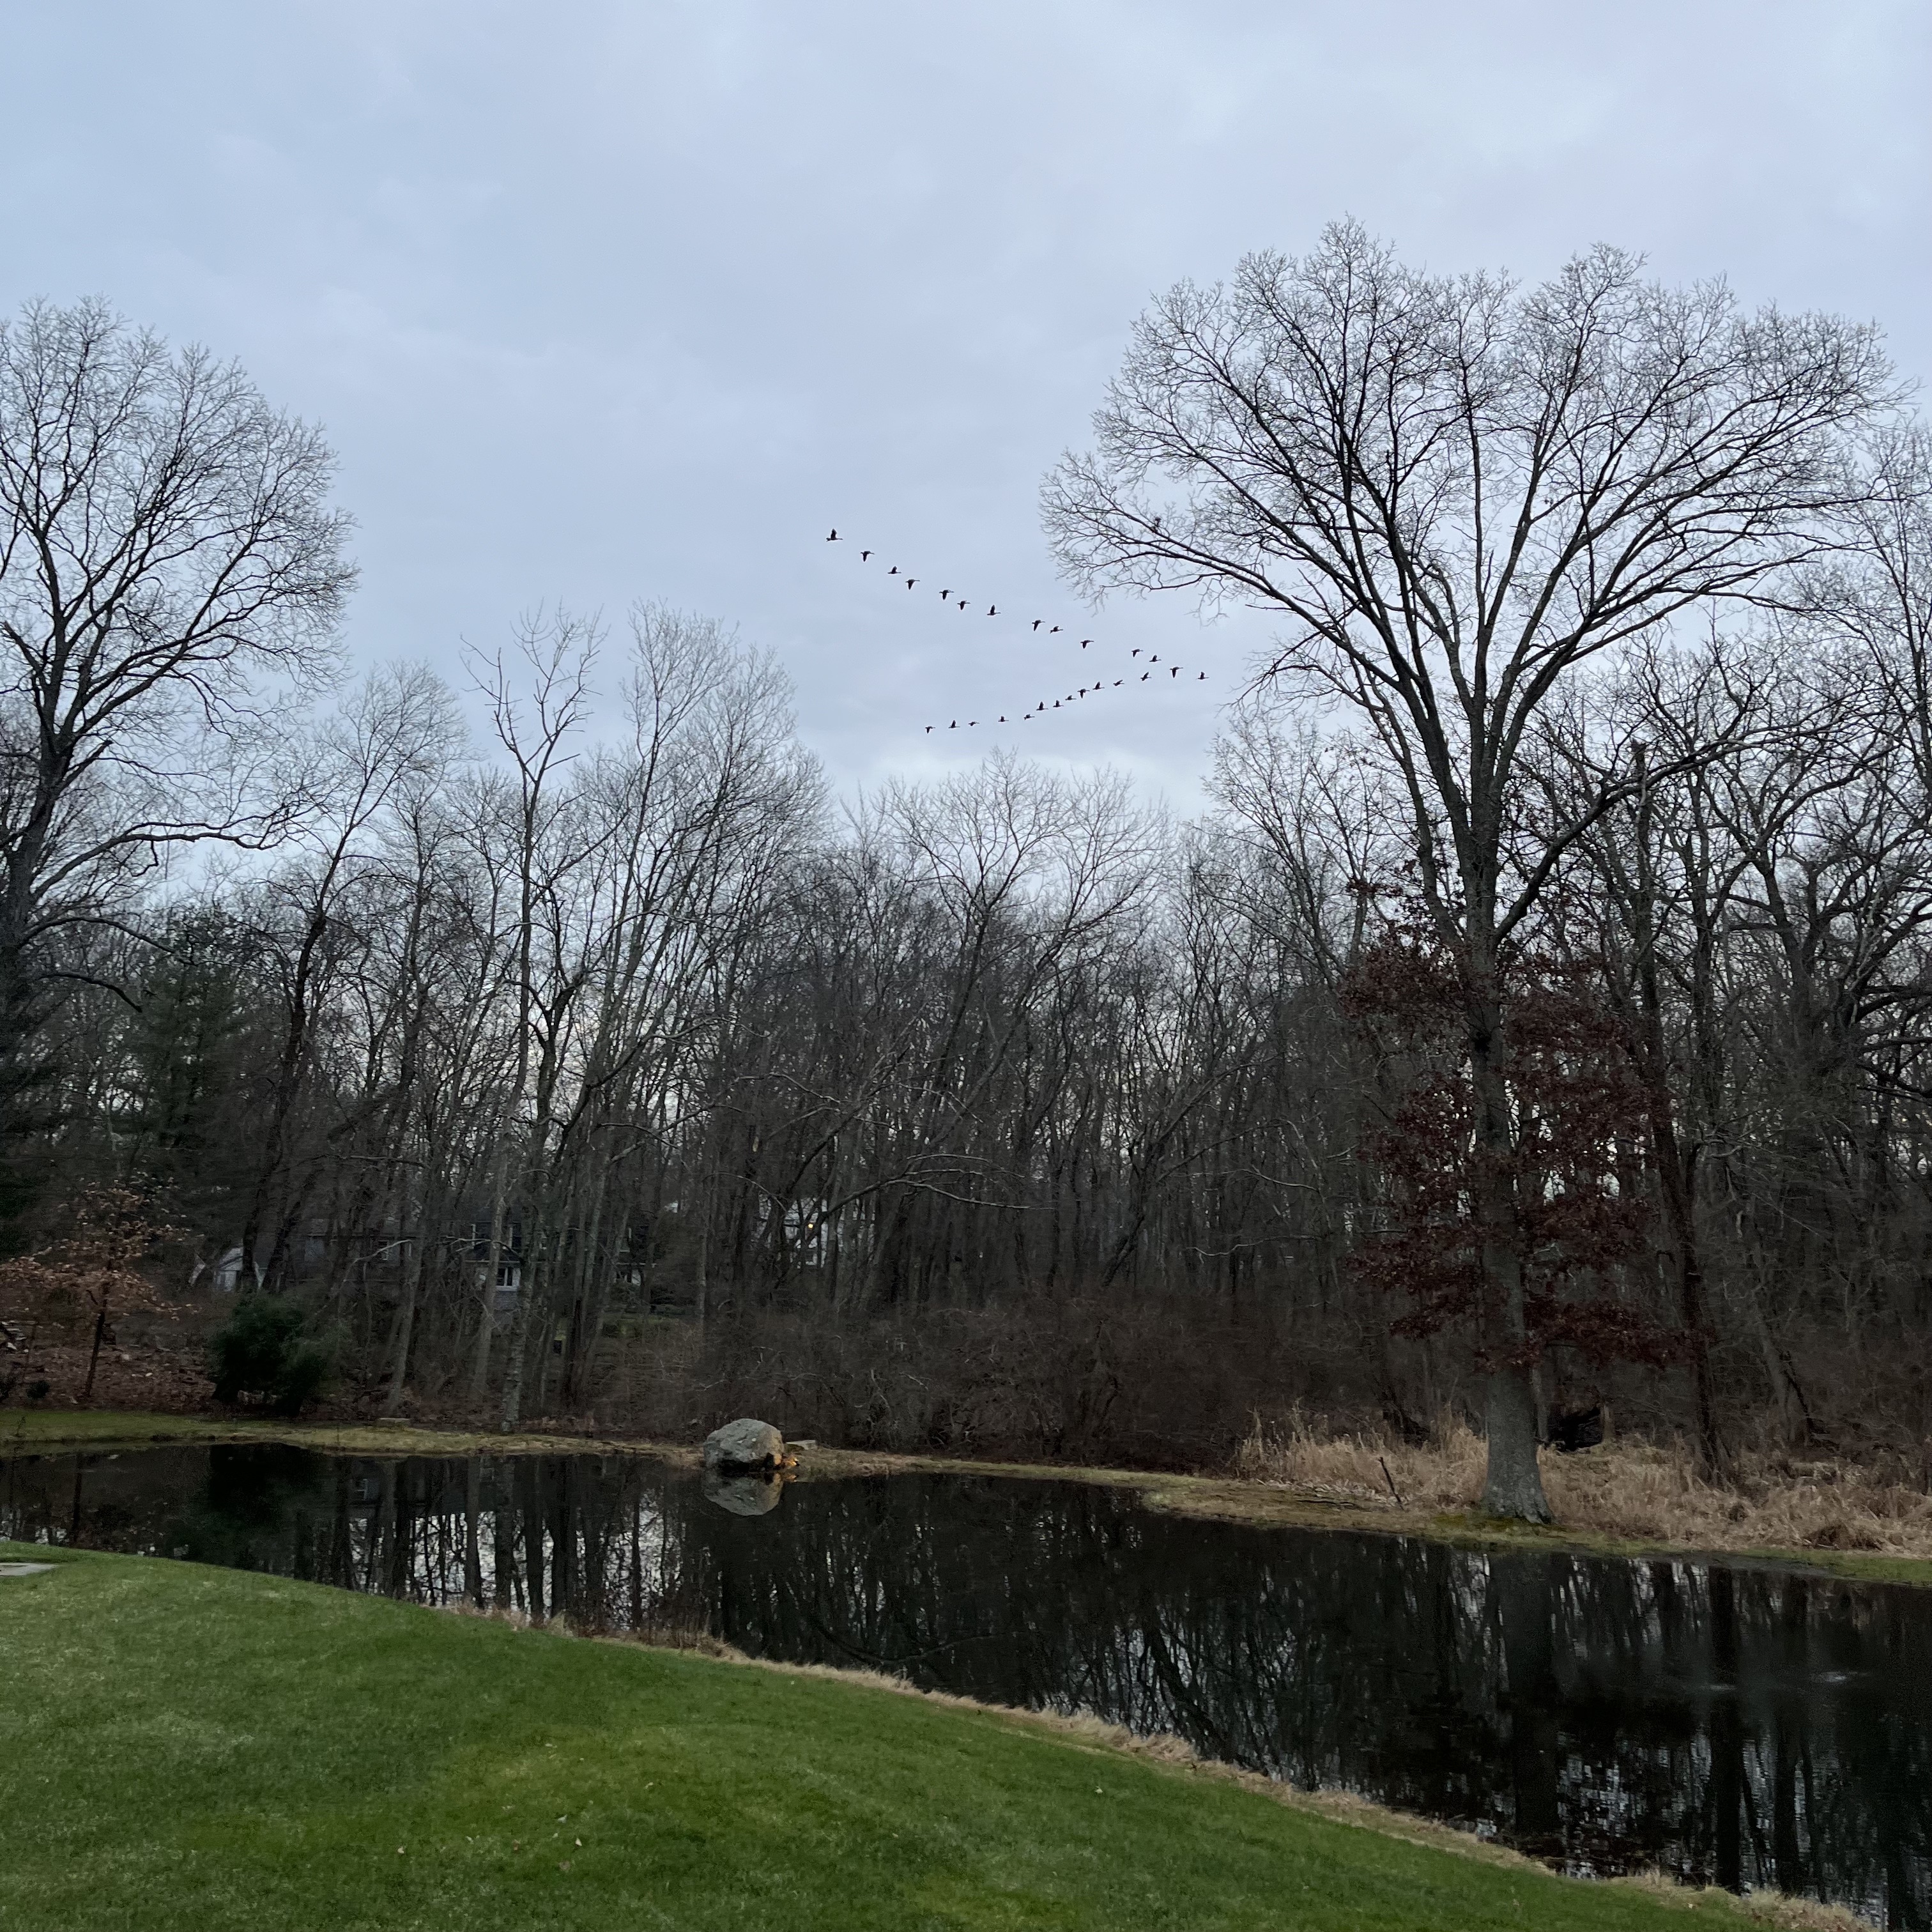 Geese flying south. Southport, Connecticut.